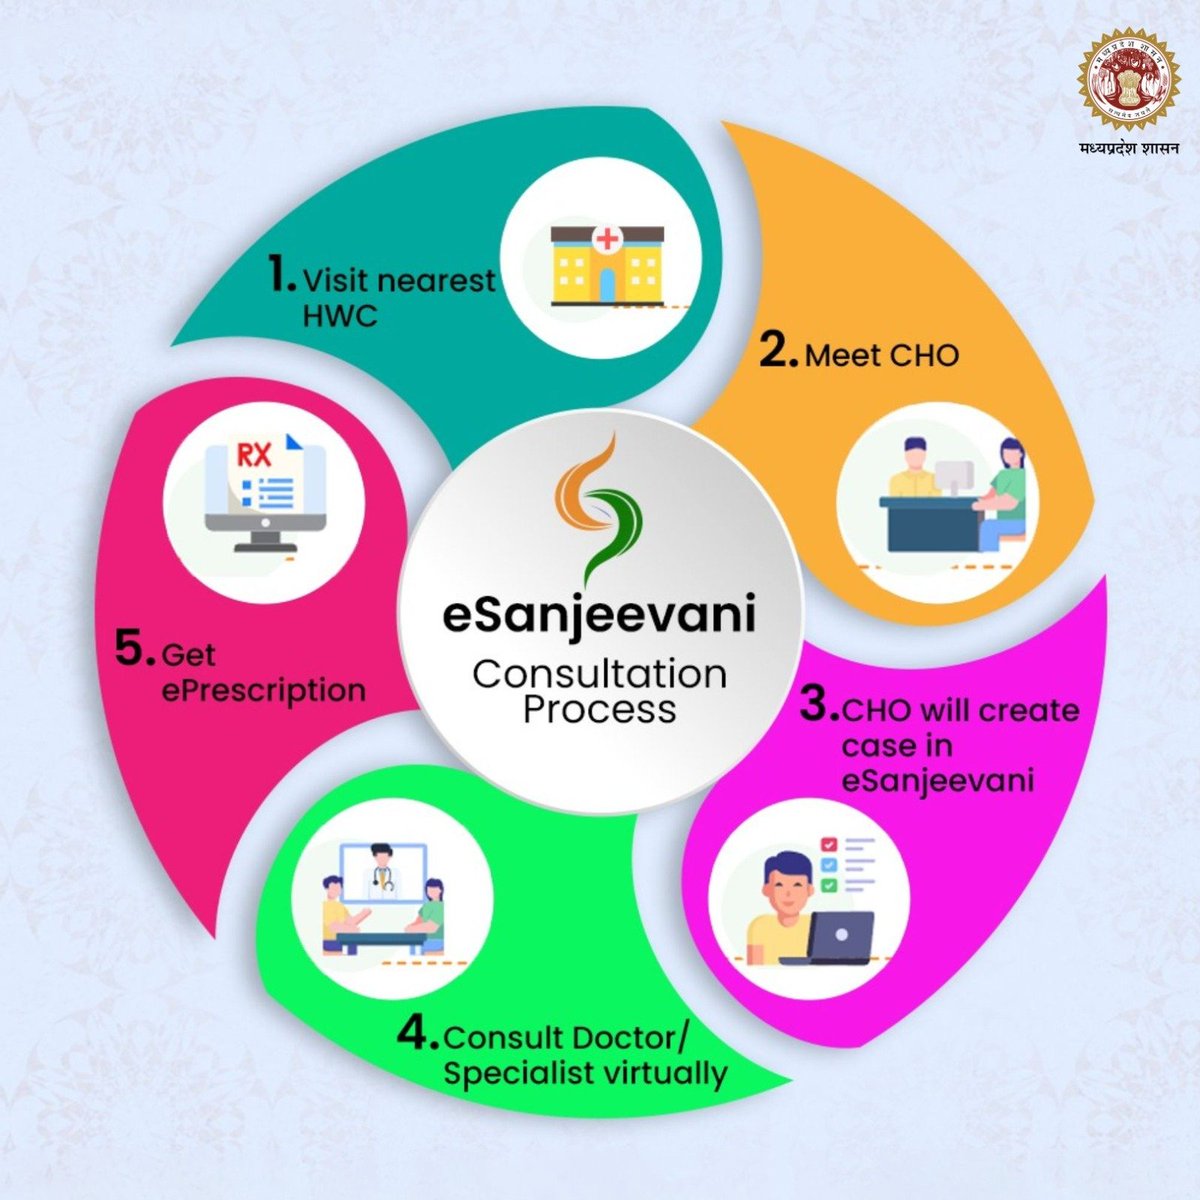 Utilising digital innovations and solutions, #eSanjeevani telemedicine platform is advancing equity in healthcare through easy access to quality services. @rshuklabjp #JansamparkMP